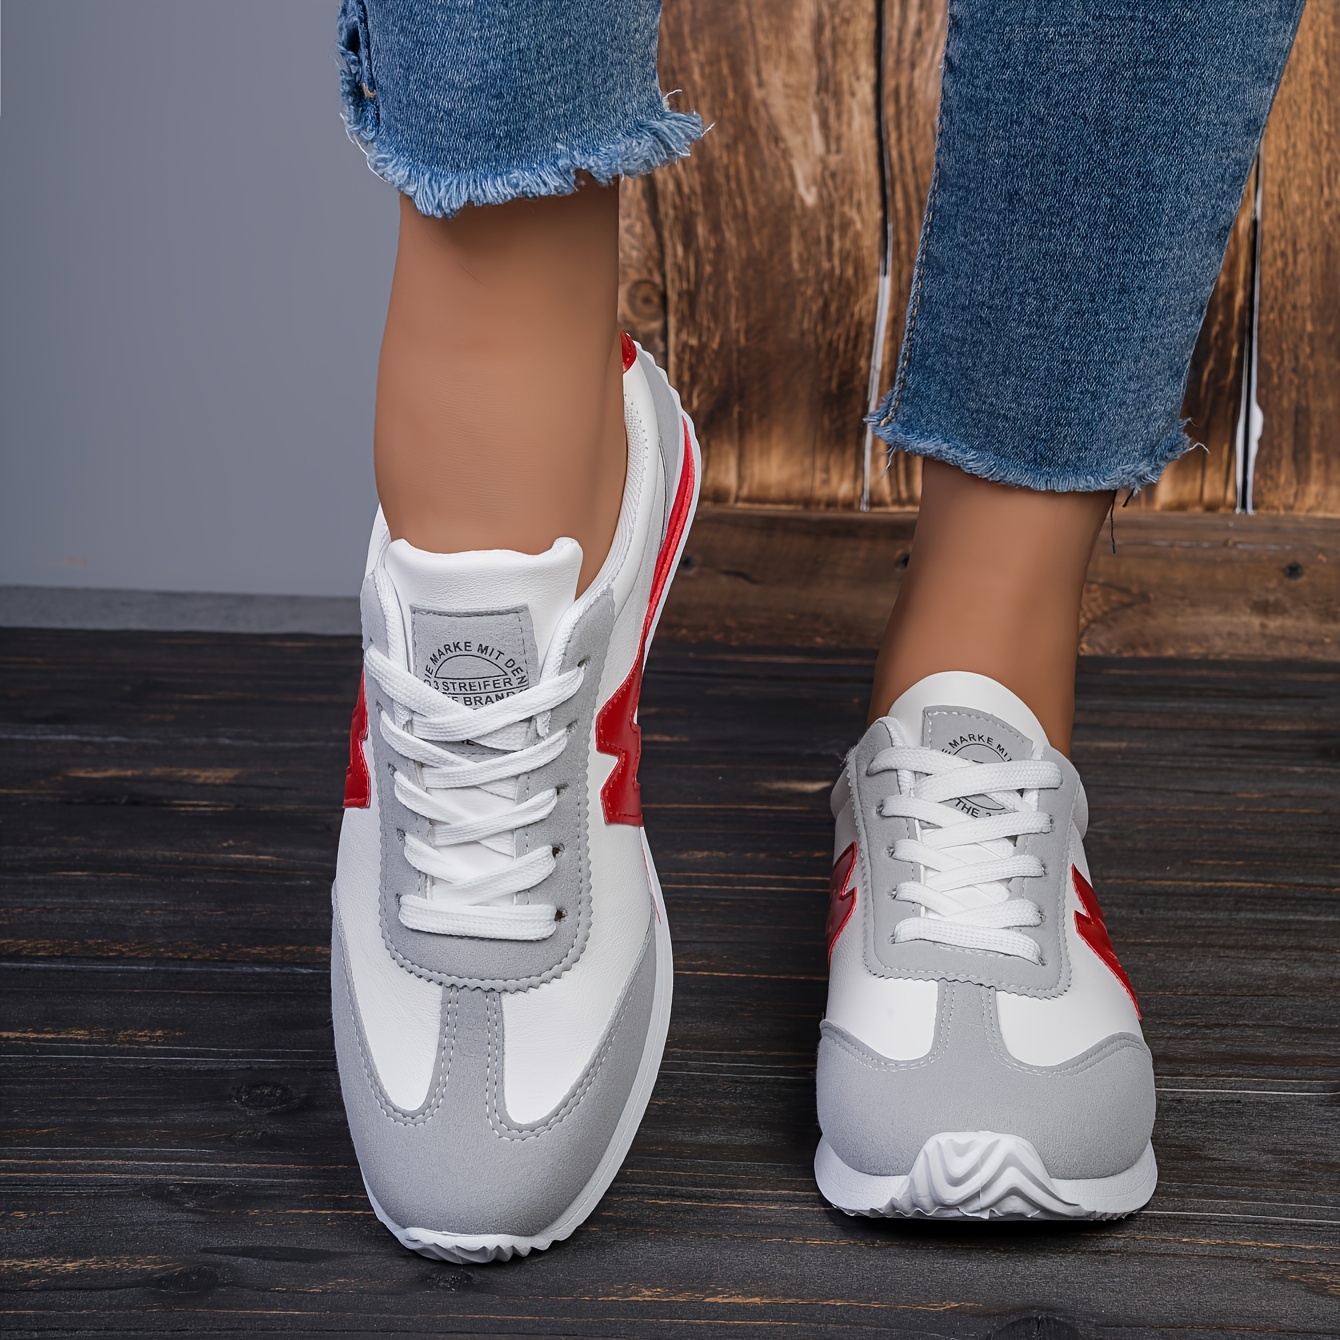 womens colorblock casual sneakers lace up soft sole platform walking shoes lightweight low top running shoes details 5